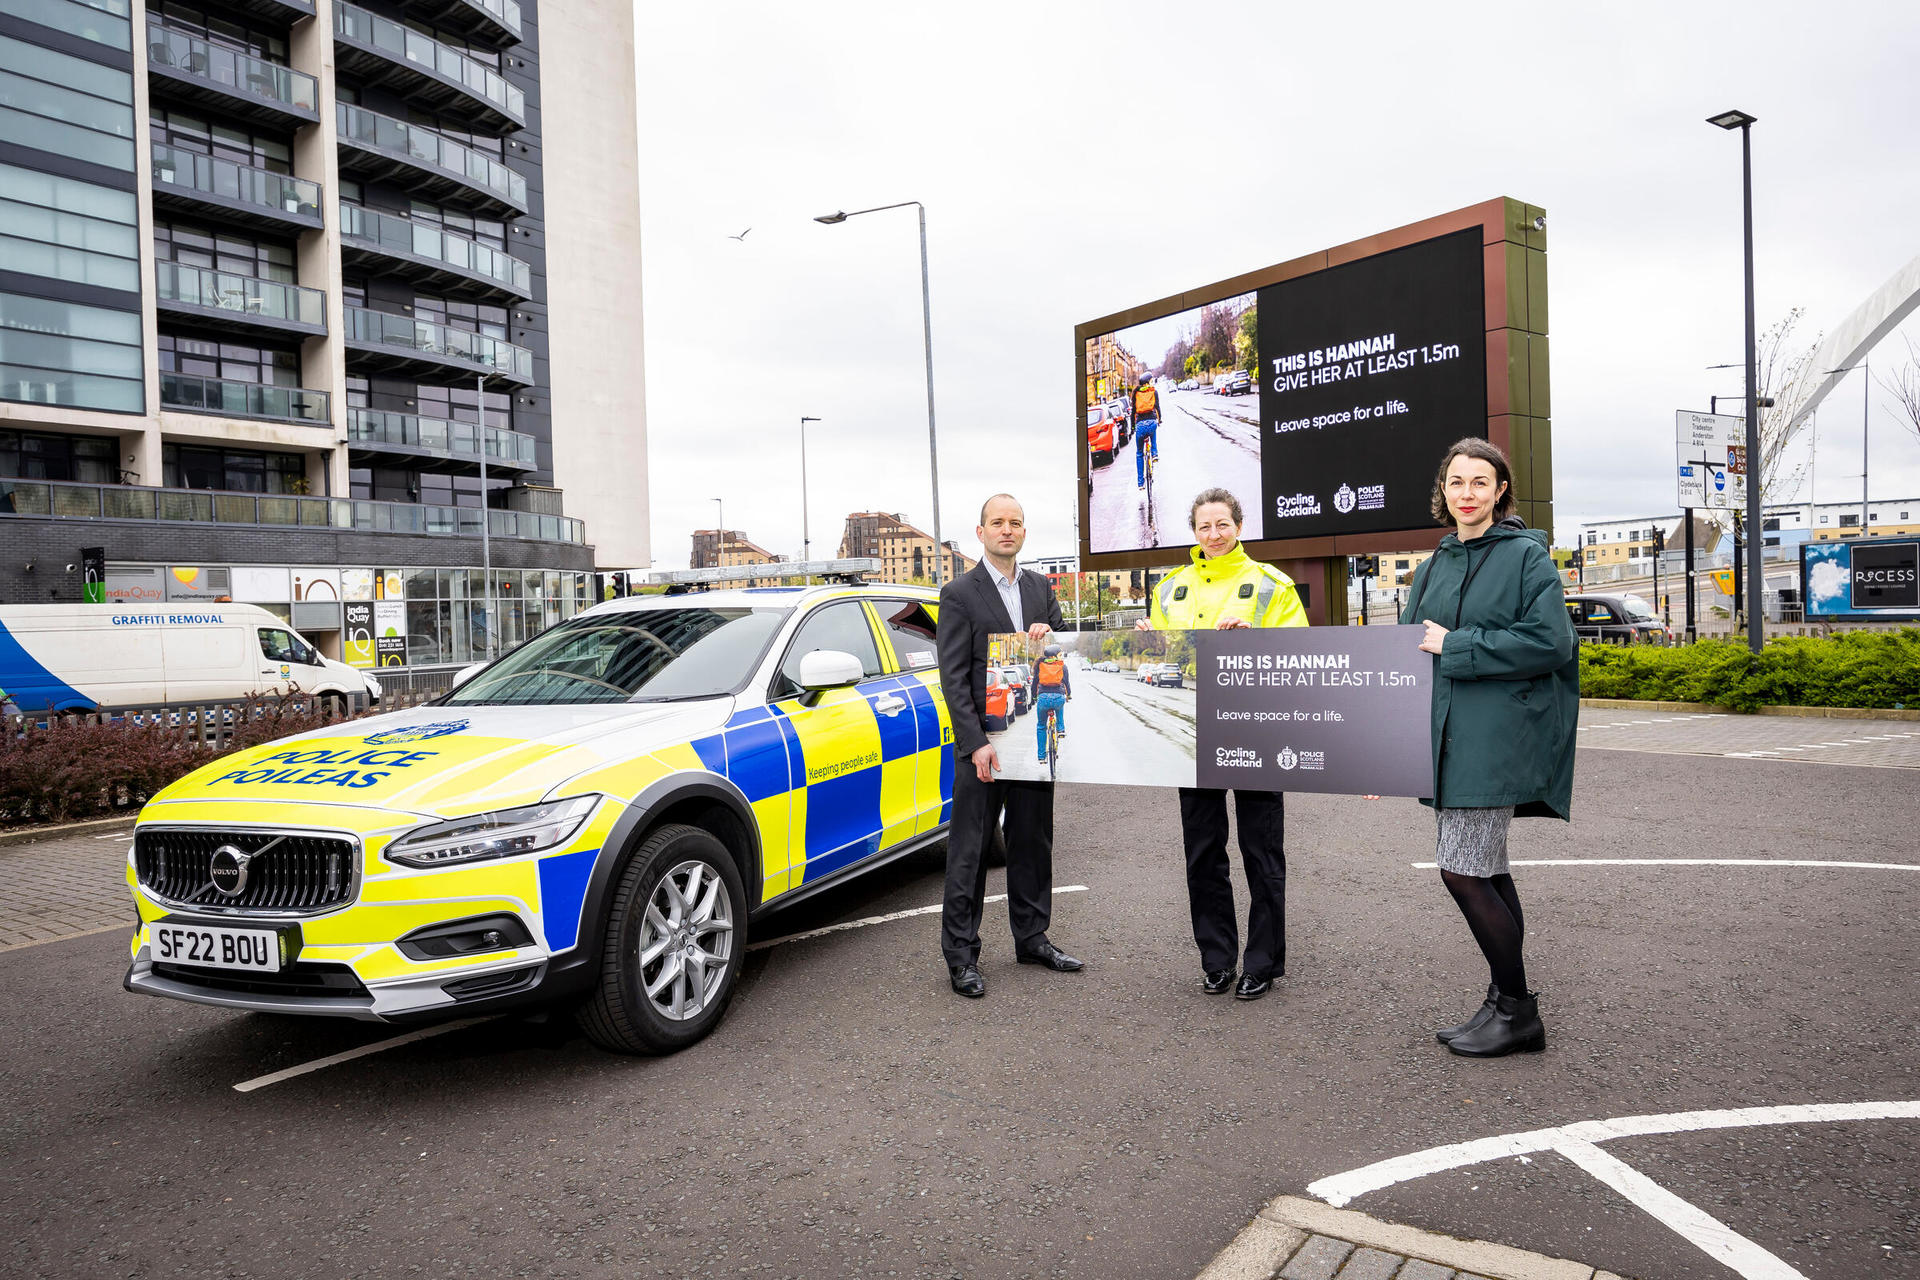 Keith Irving (Chief Executive, Cycling Scotland), Chief Superintendent Hilary Sloan (Head of Road Policing, Police Scotland), and Clare Skelton-Morris (Communications Manager, Cycling Scotland) at campaign launch in Glasgow